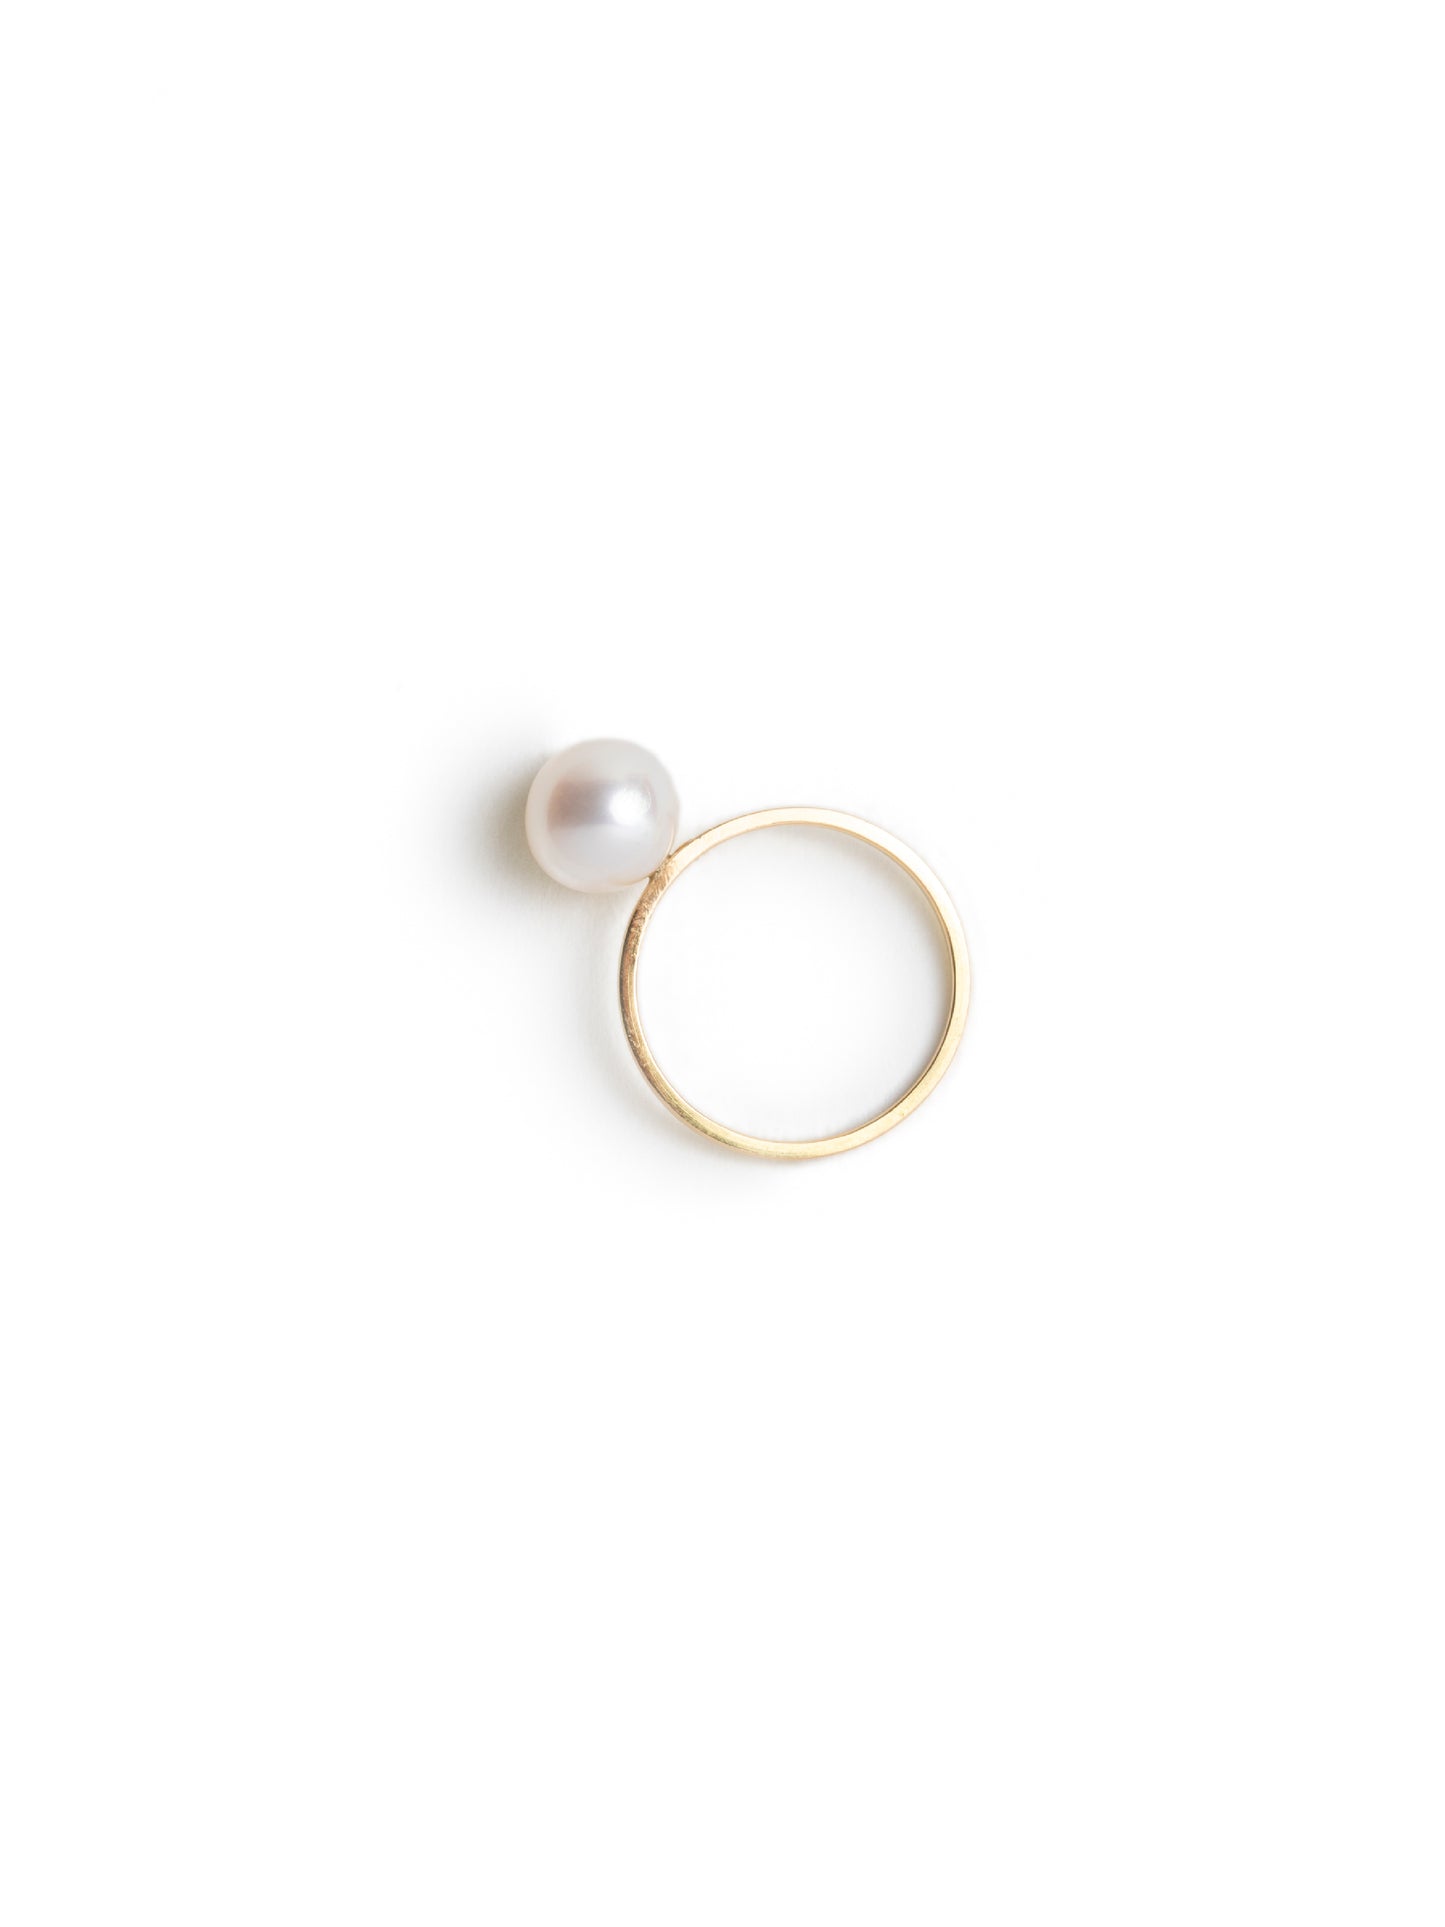 GOLD RING WITH PEARL II